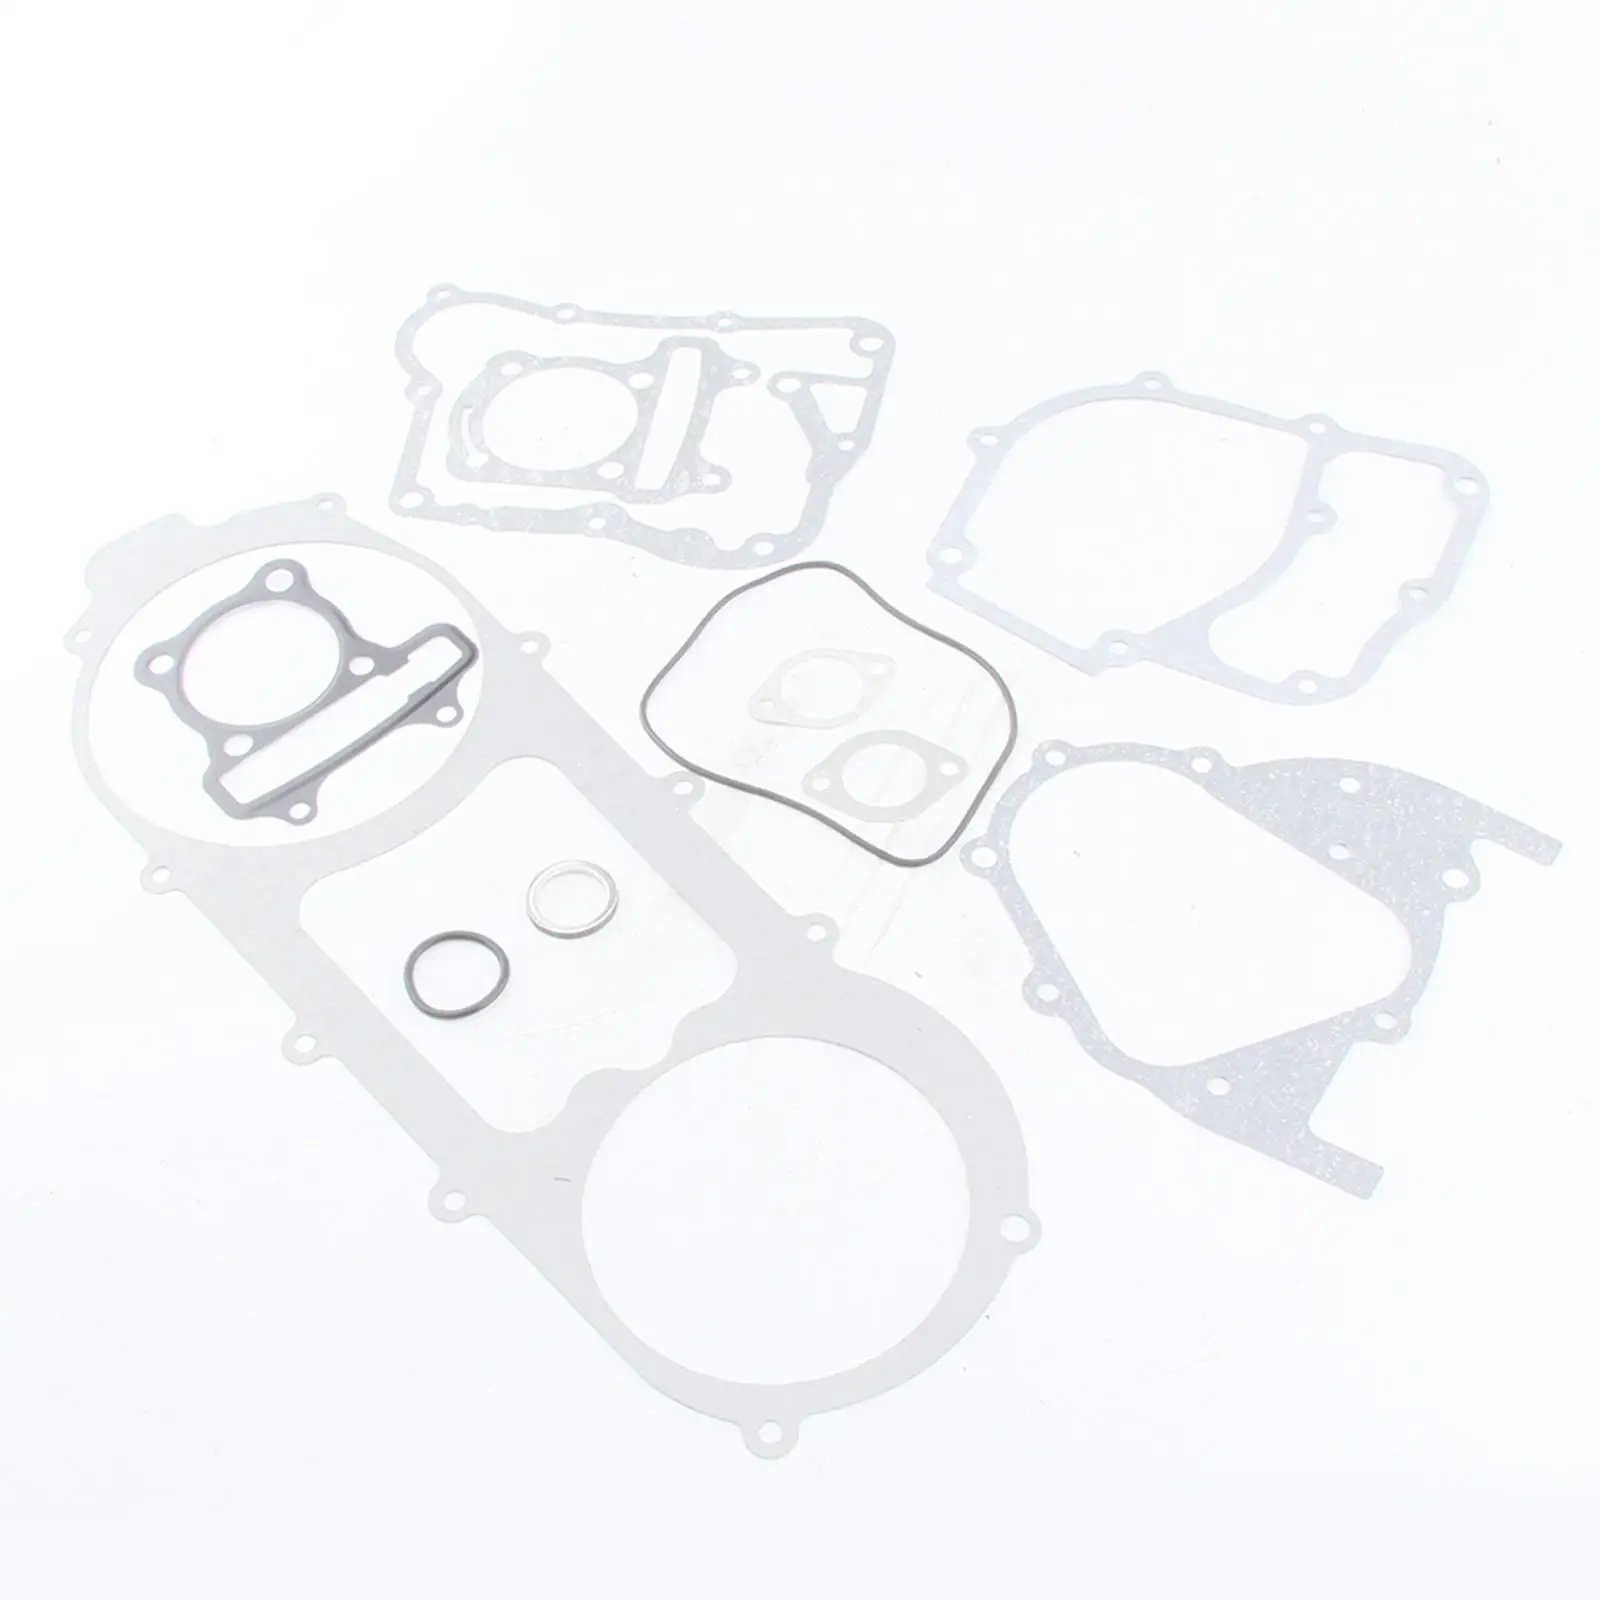 Complete Long Case Engine Head Gasket Set Kit for GY6 150cc Moped Scooters ATVs Go Karts QuadEasy to install.